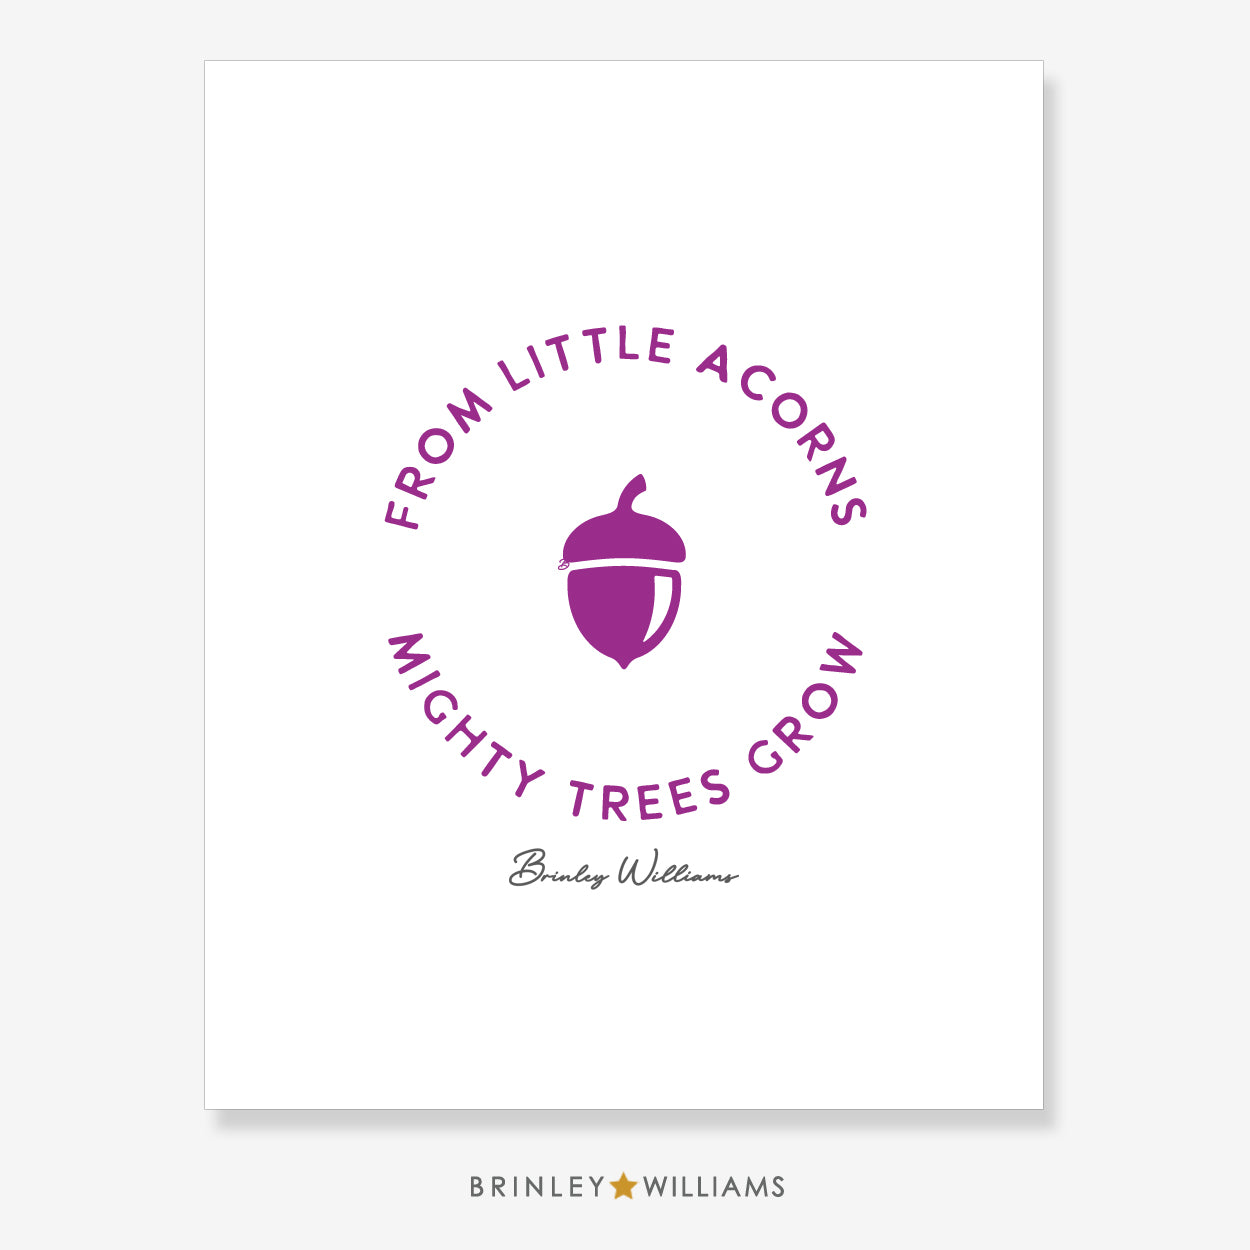 From little acorns mighty trees grow Wall Art Poster - Purple